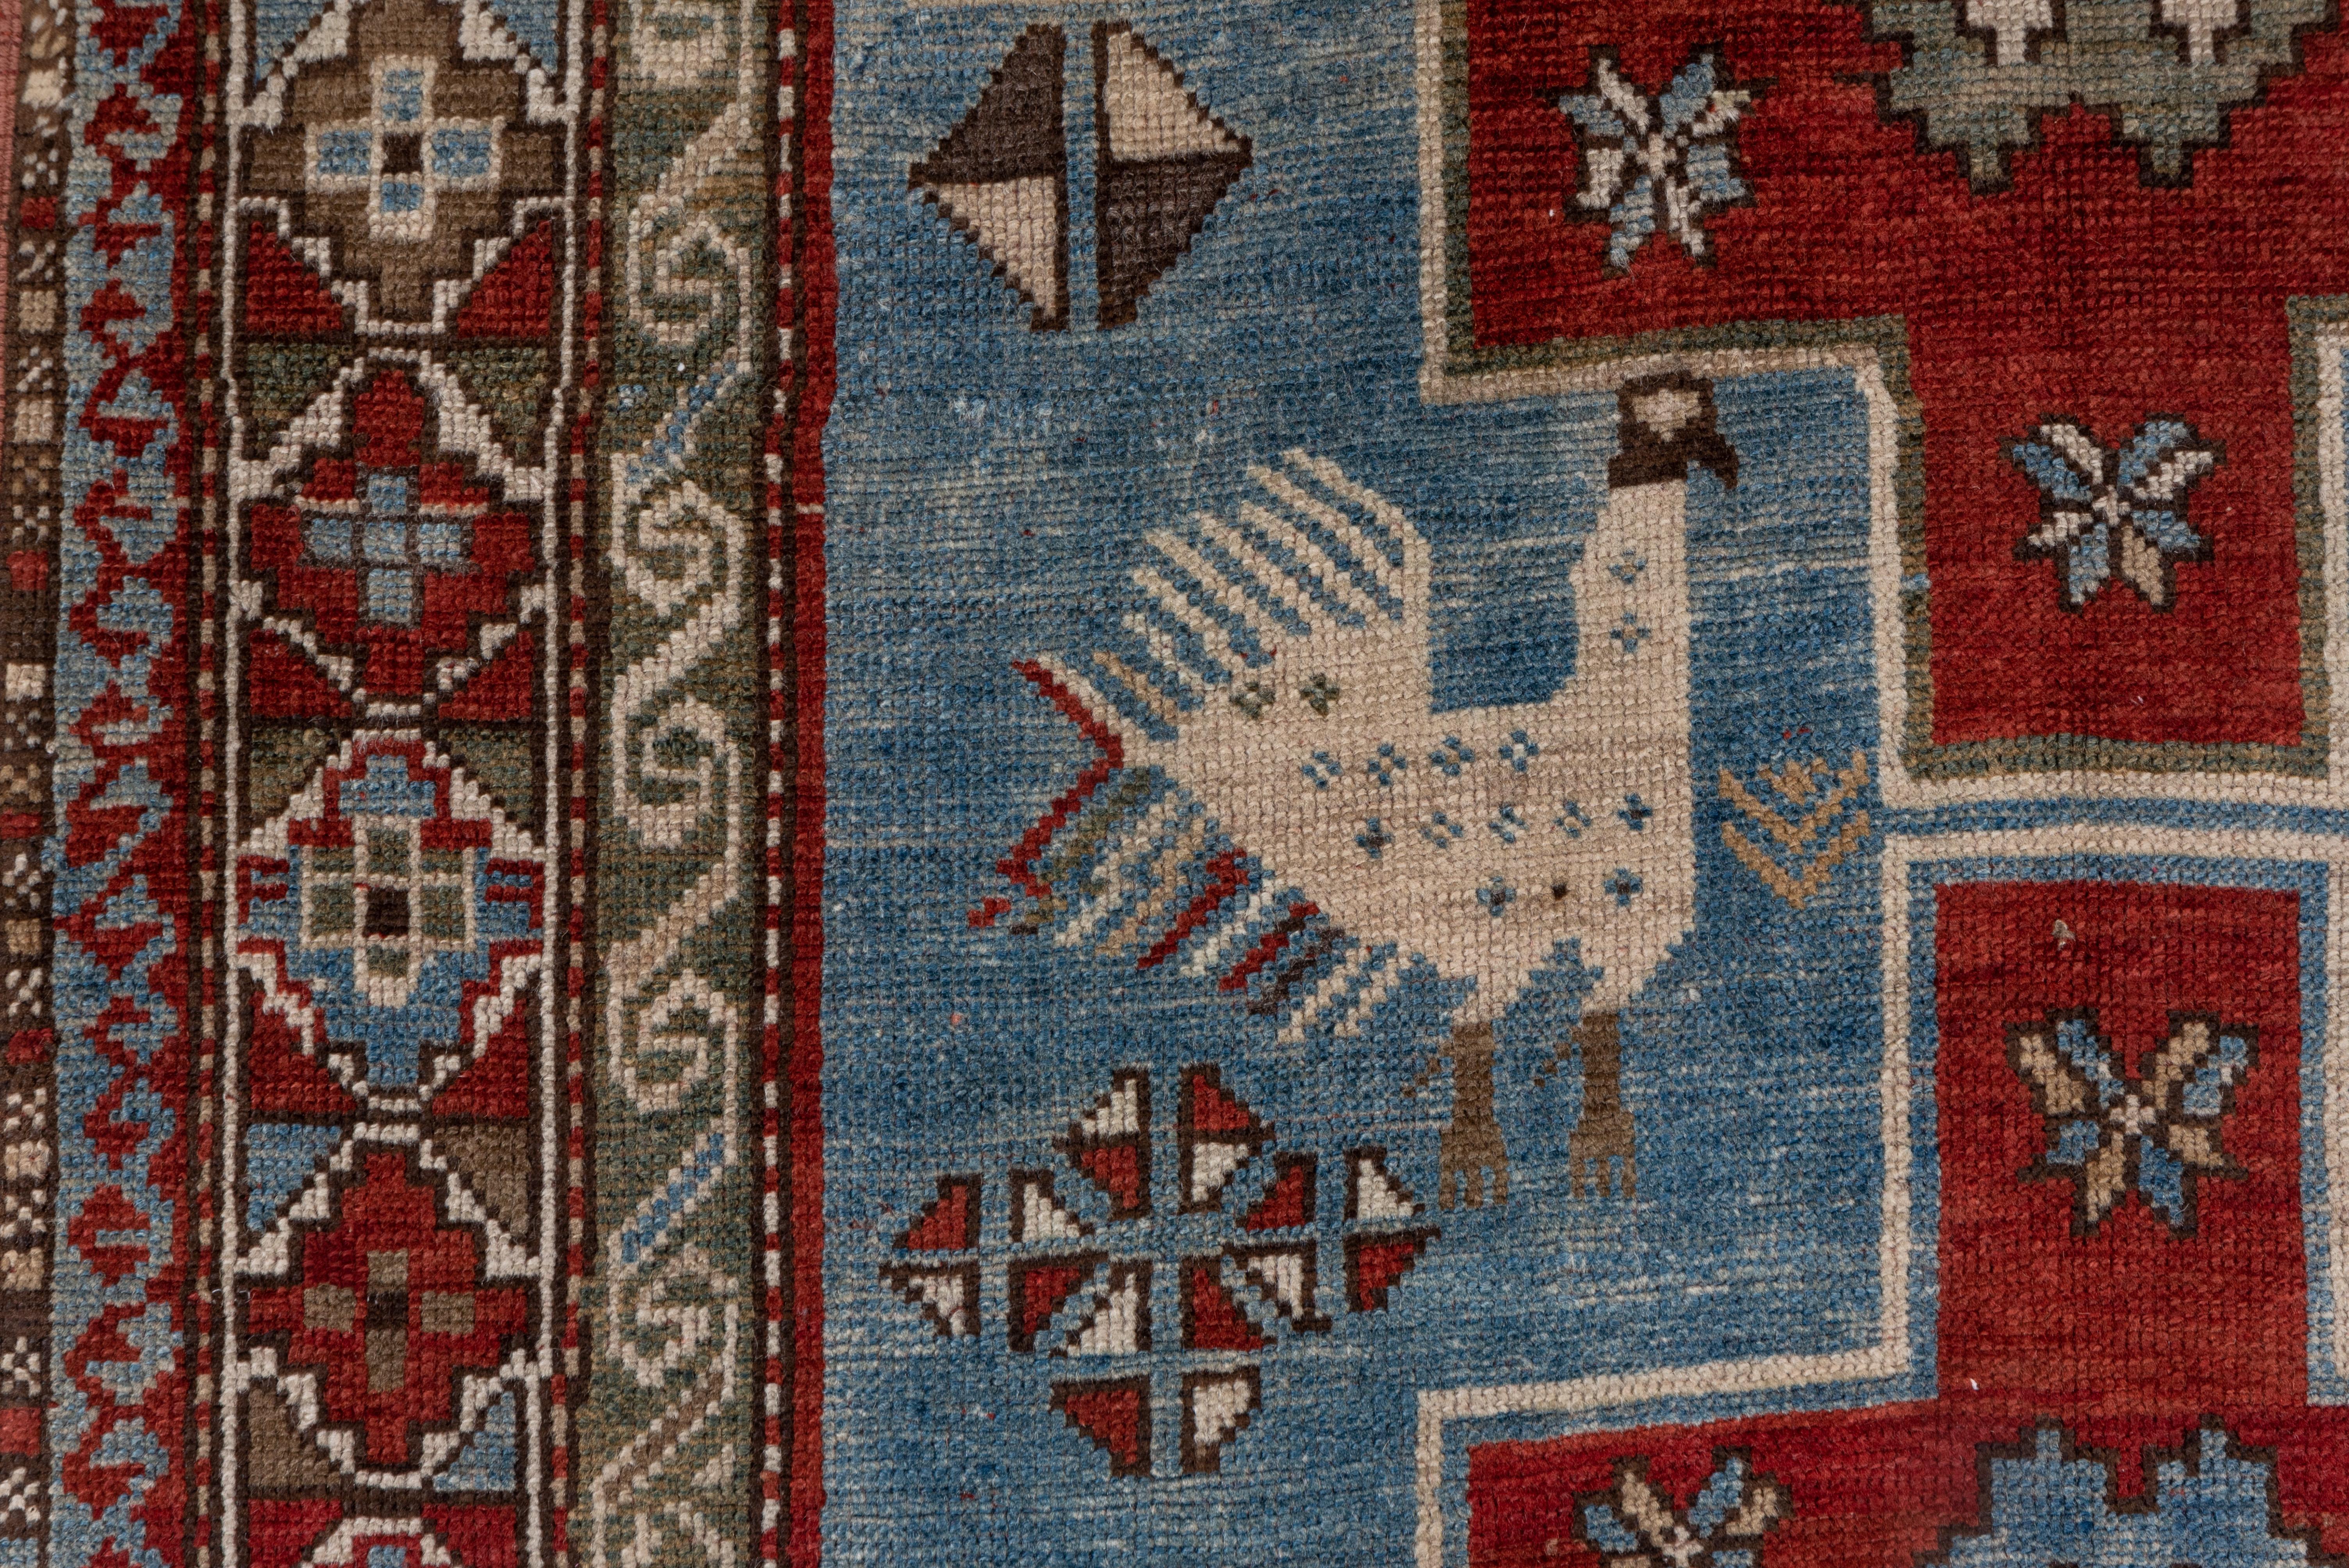 Two large, graphic off white peacocks and smaller animals flank the three bold stepped red cruciform medallions on the light blue ground. Ivory ground border of stepped octagon and filler triangle modules. Probably Kazak or Karabagh.